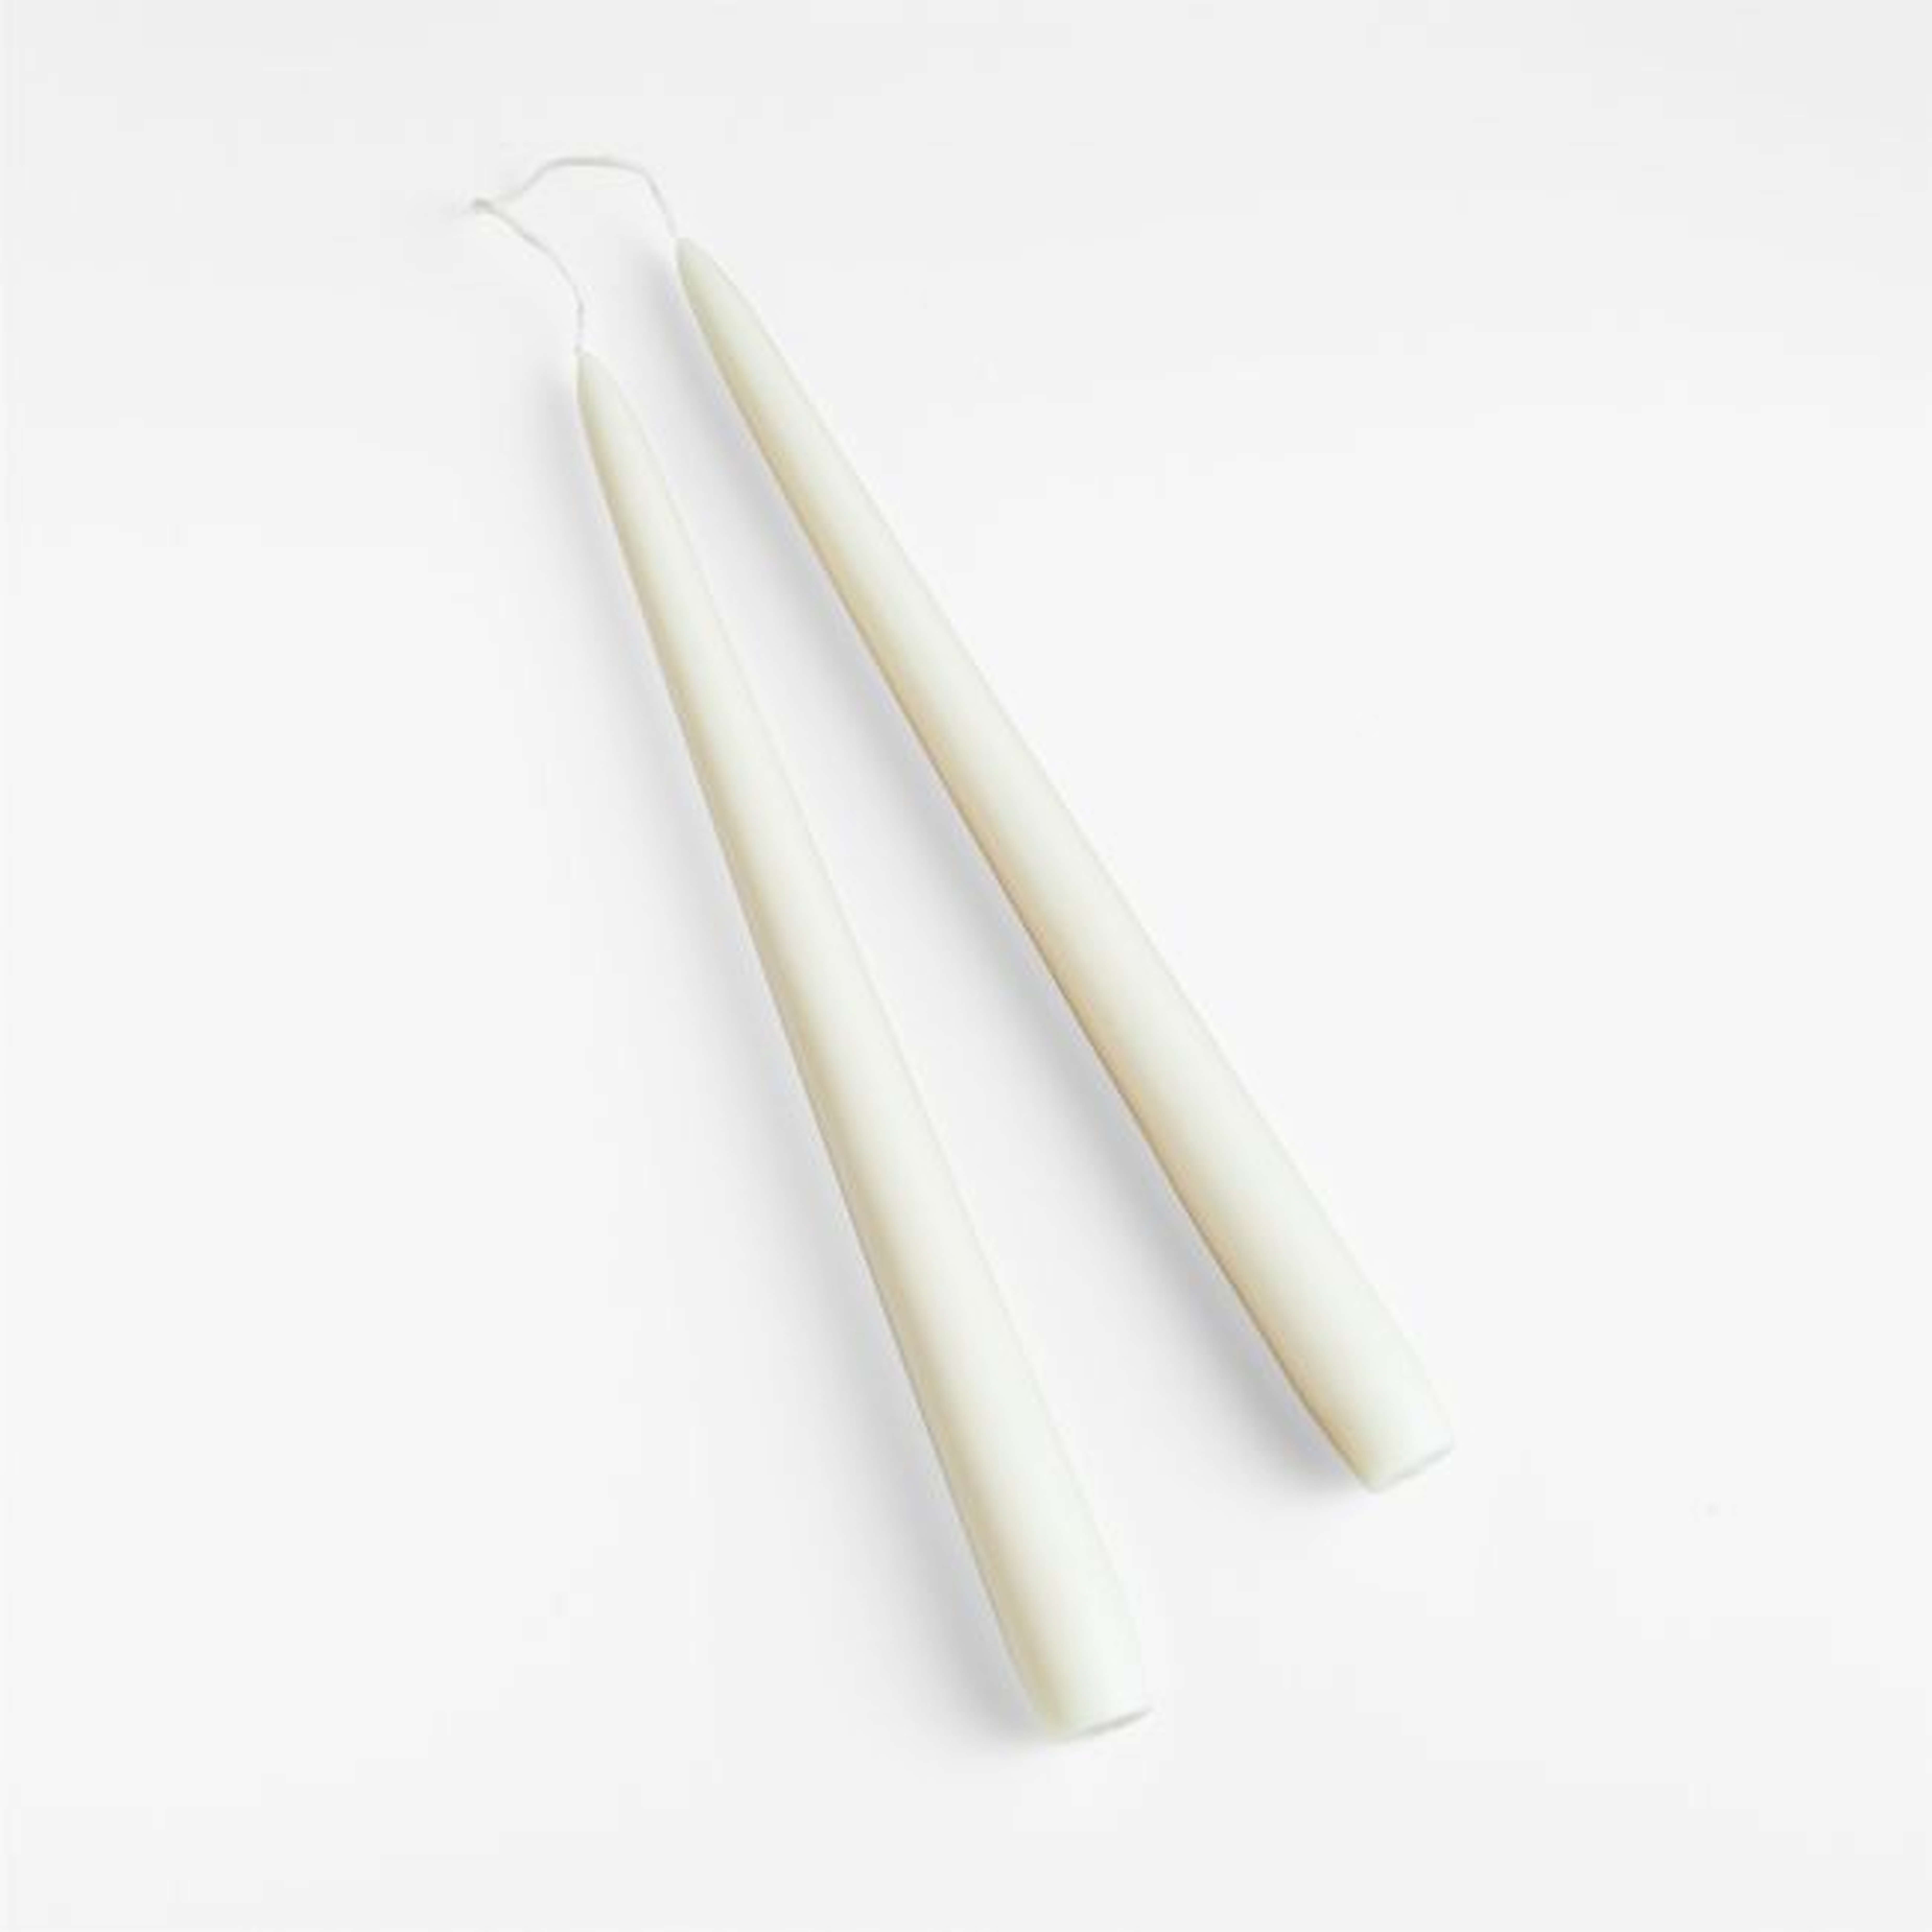 Dipped Linen Taper Candles, Set of 2 - Crate and Barrel